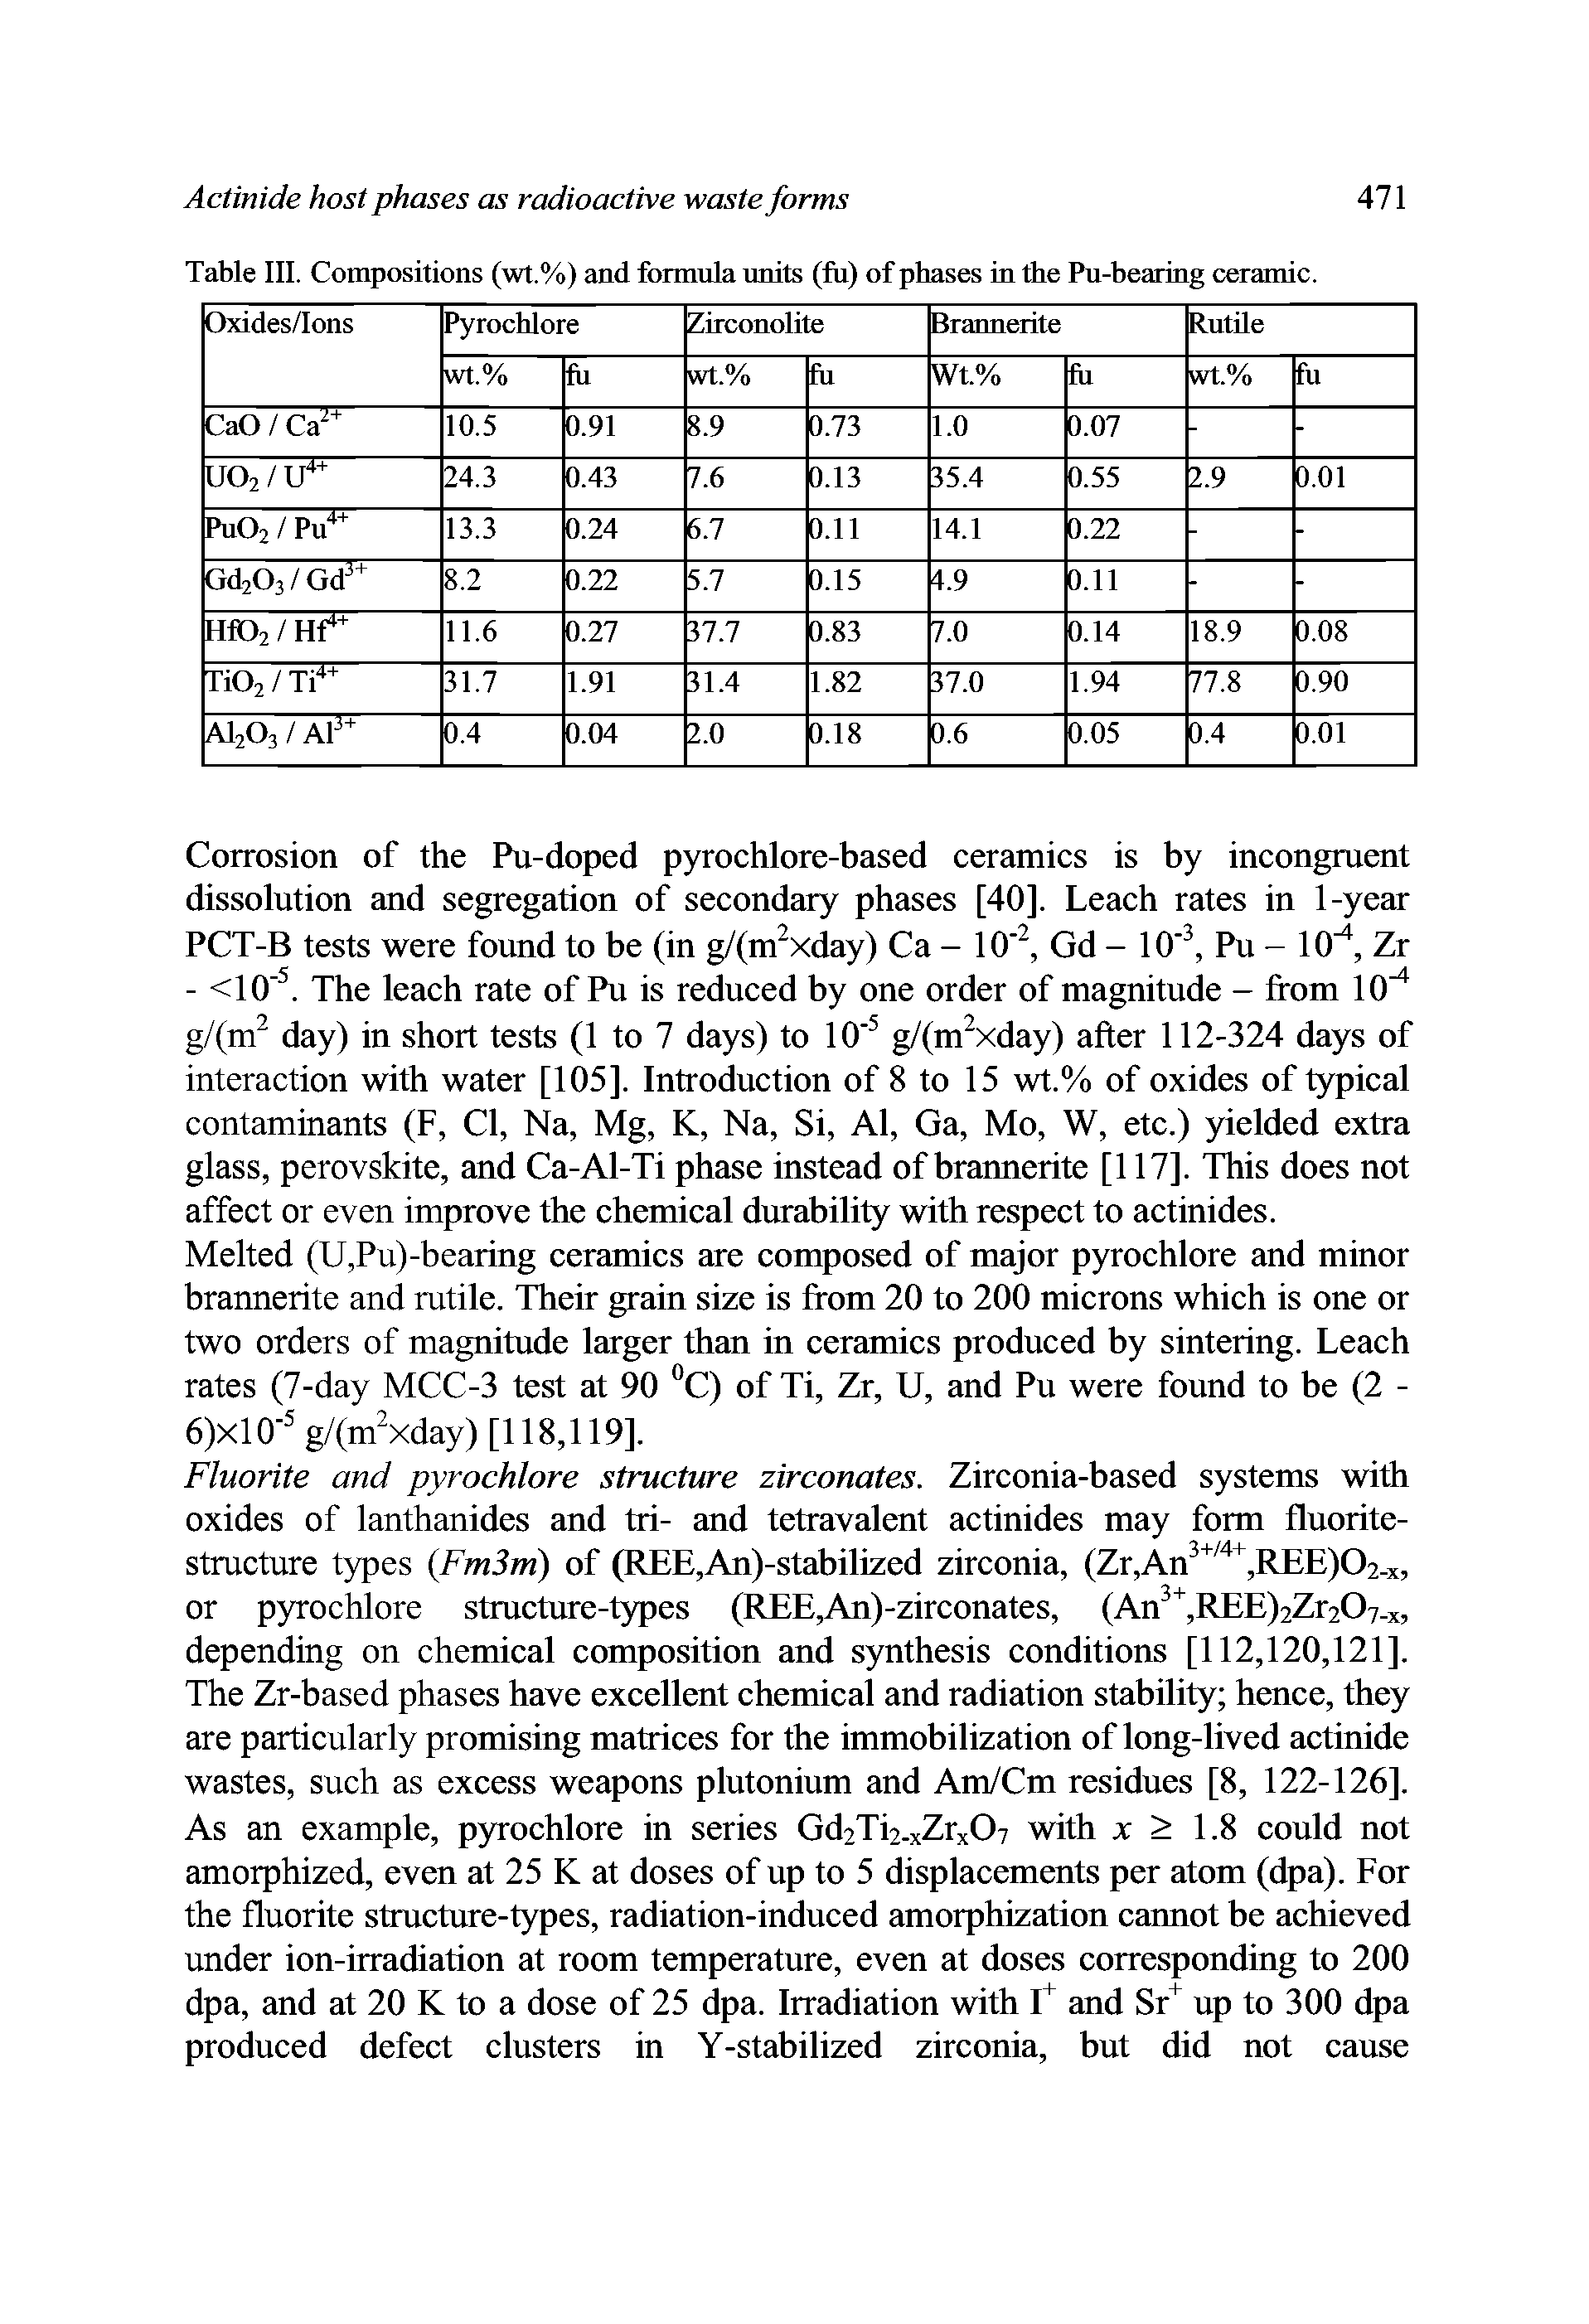 Table III. Compositions (wt.%) and formula units (fn) of phases in the Pu-bearing ceramic.